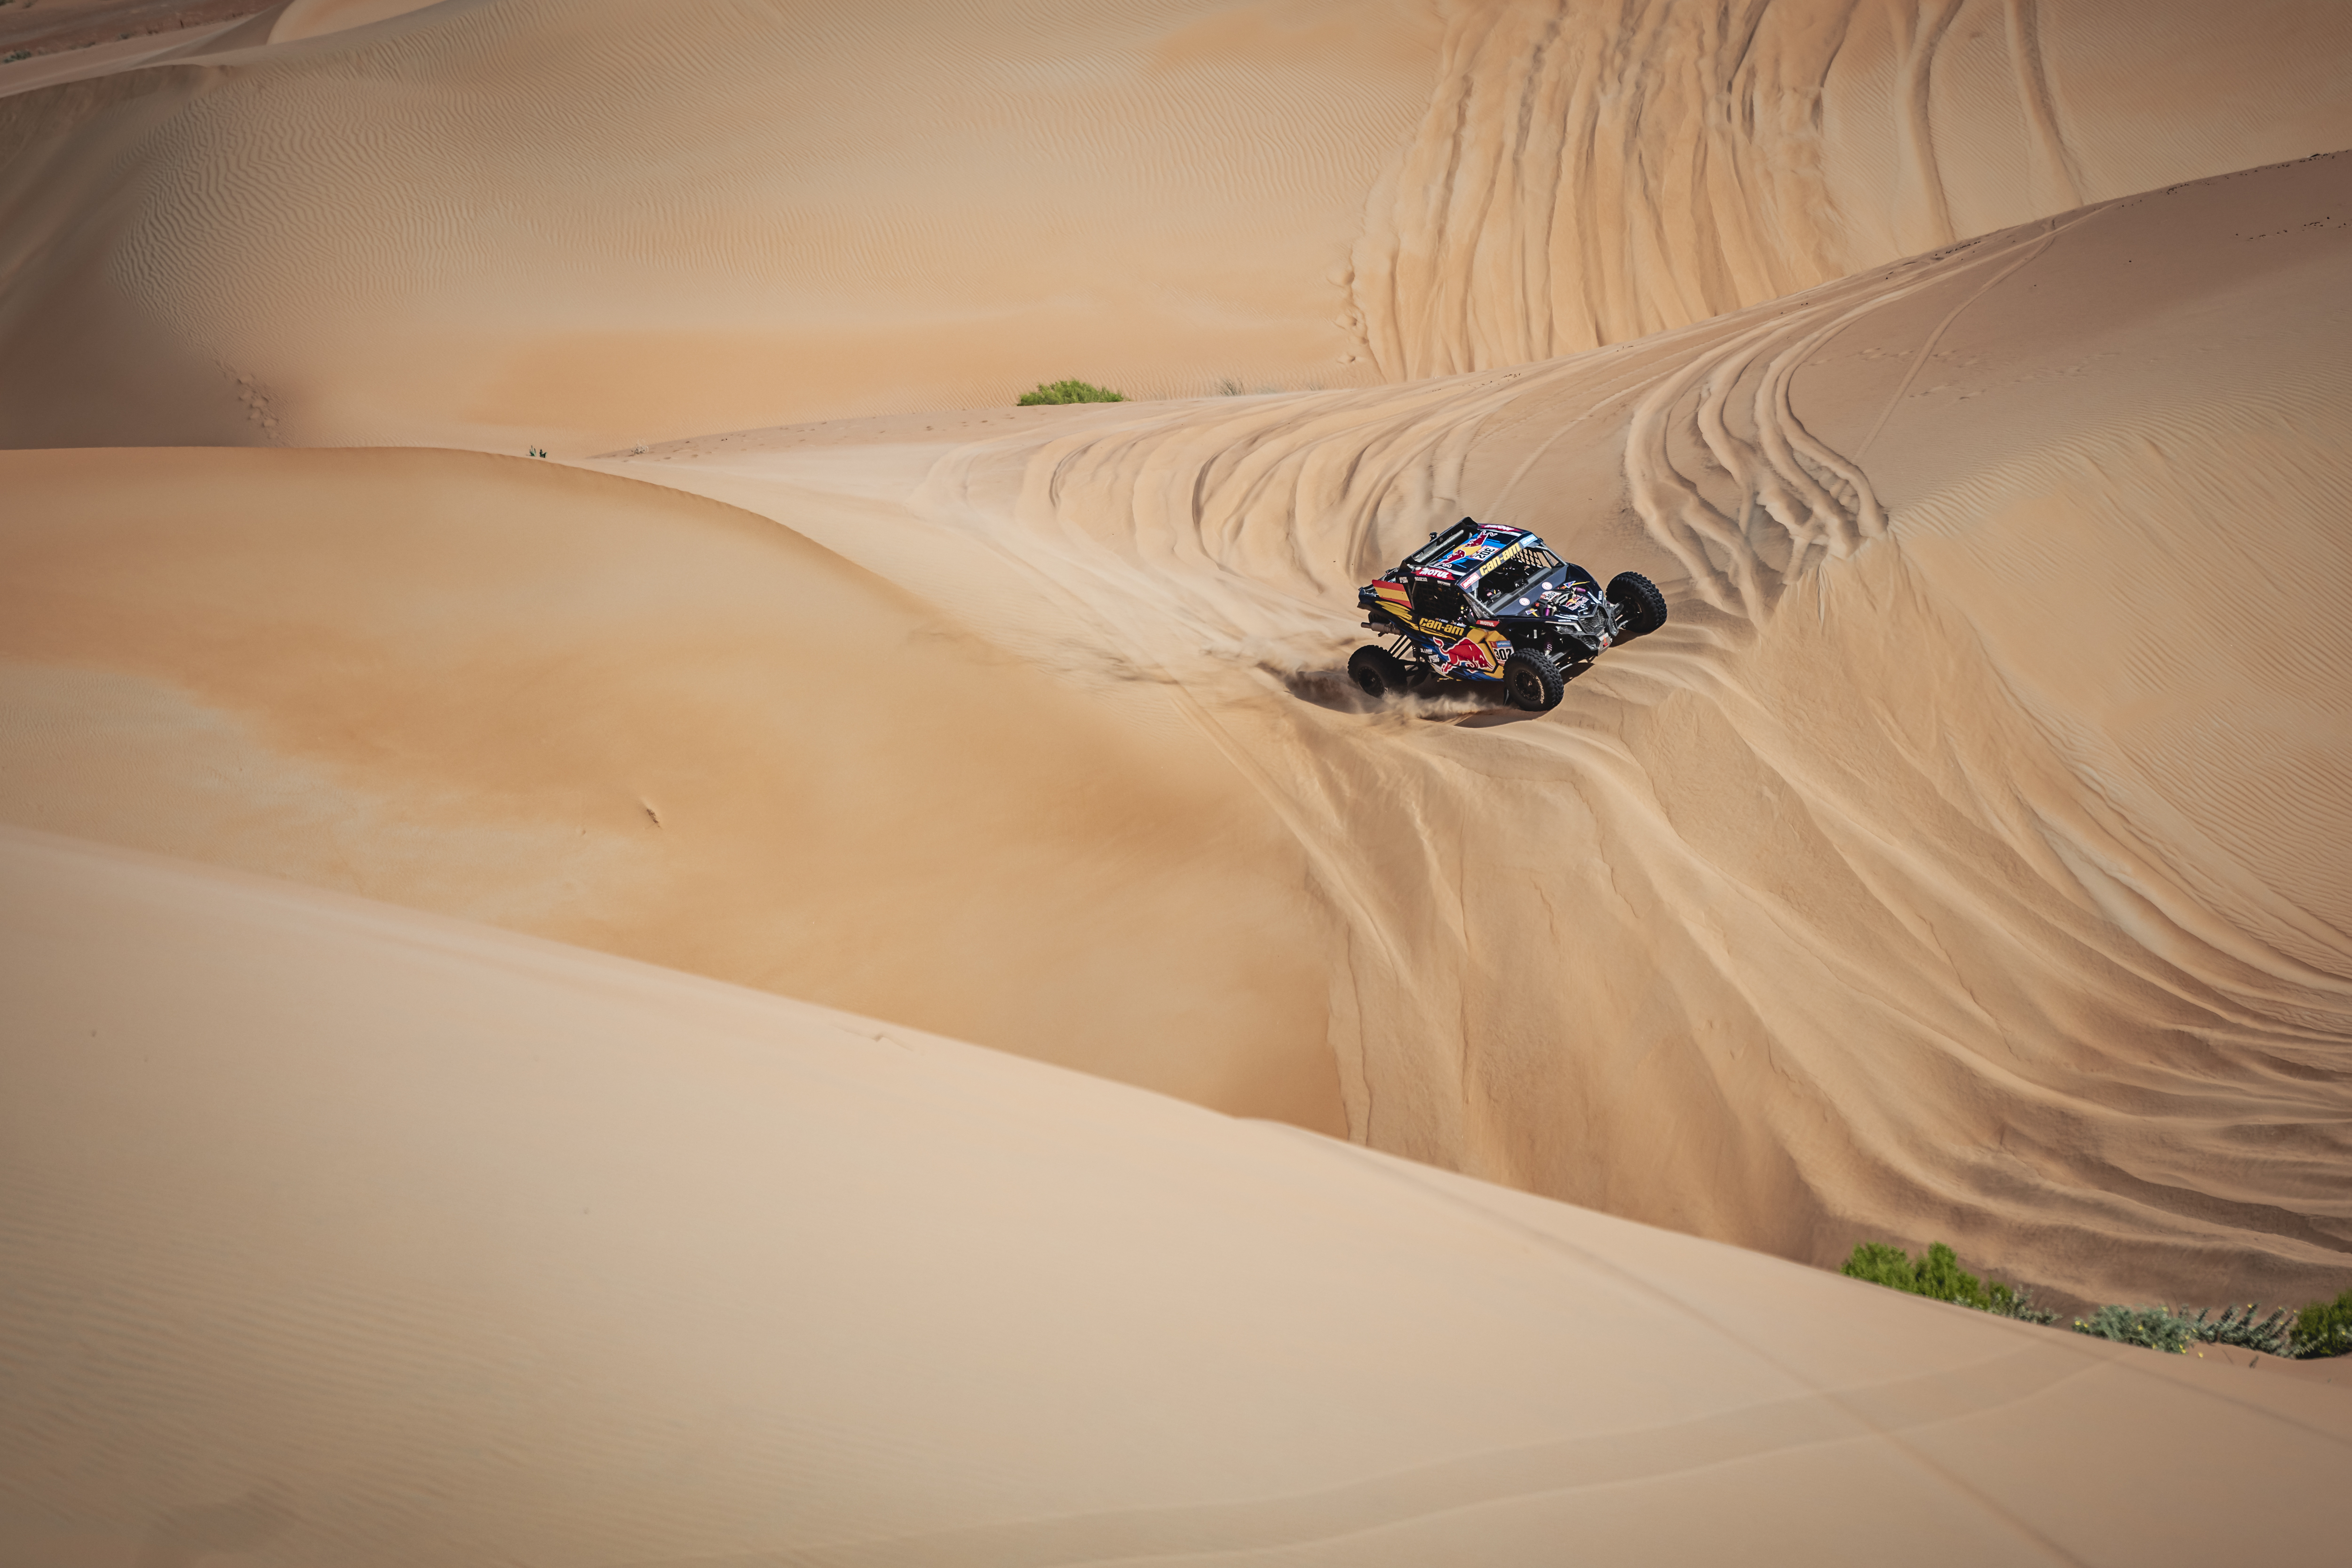 Cristina Gutierrez (ESP) of Red Bull Can-Am Factory Team races during stage 13 of Rally Dakar
2023 from Shaybah to Al Hofuf, Saudi Arabia on January 14, 2023